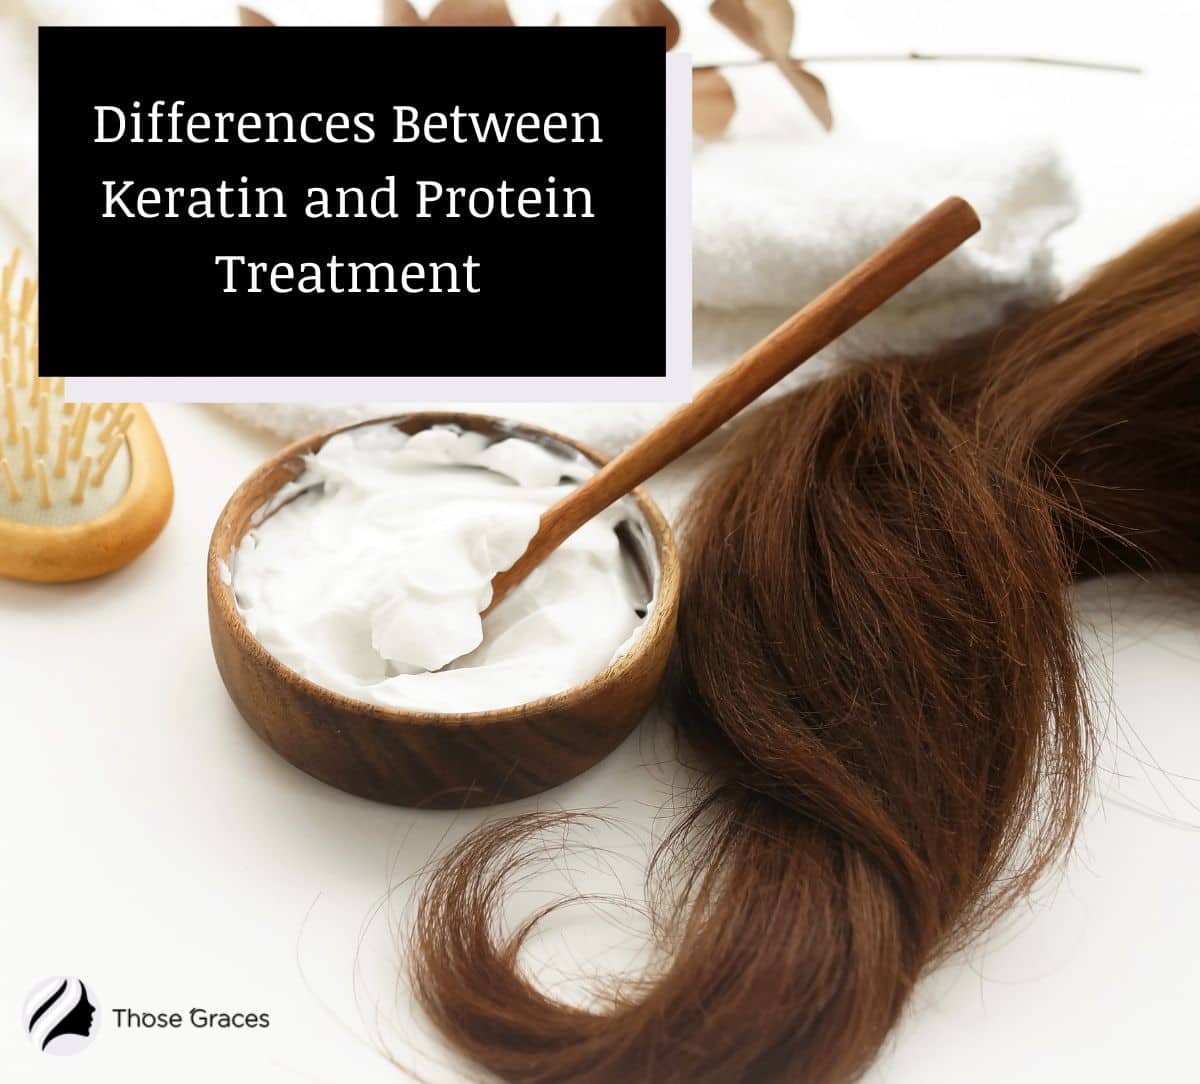 a photo showing the Differences Between Keratin and Protein Treatment